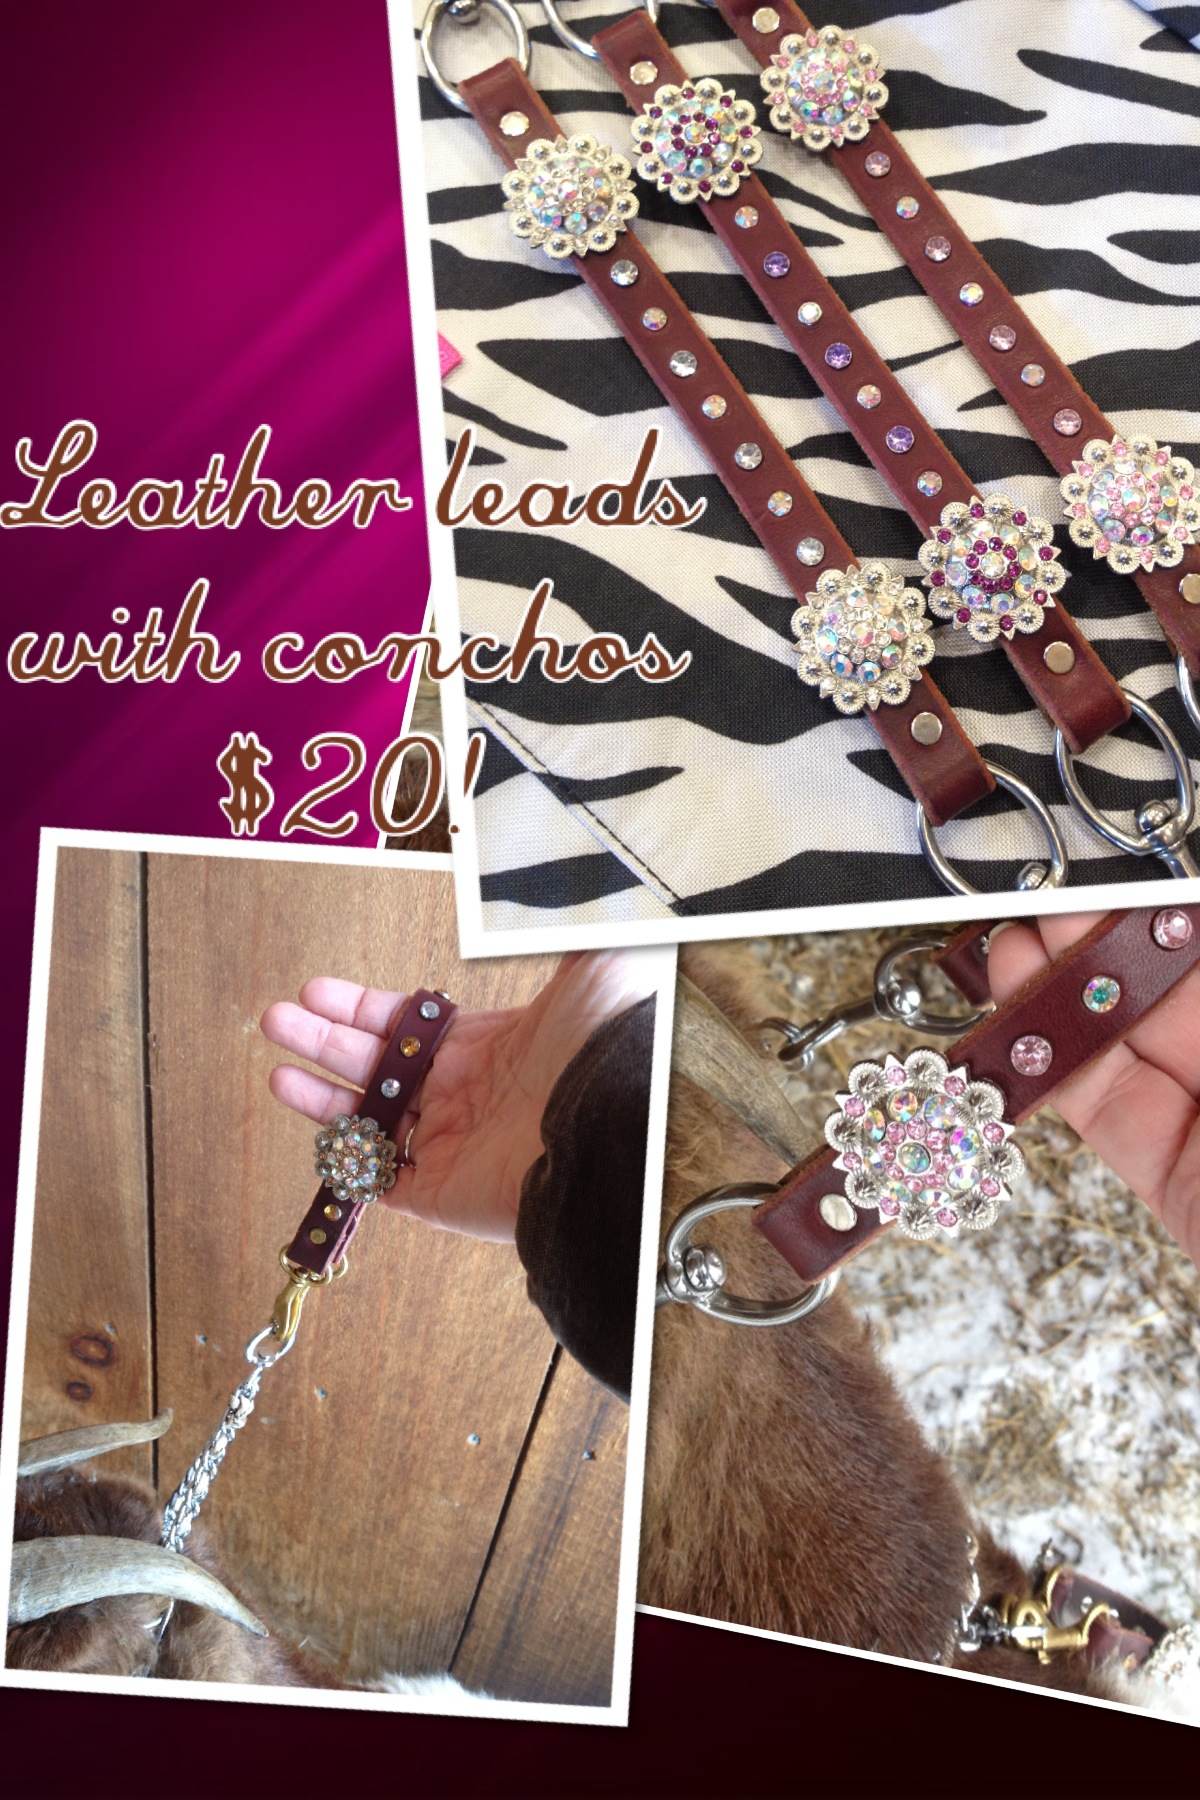 Goat Show Leads and Chains with leather and rhinestones